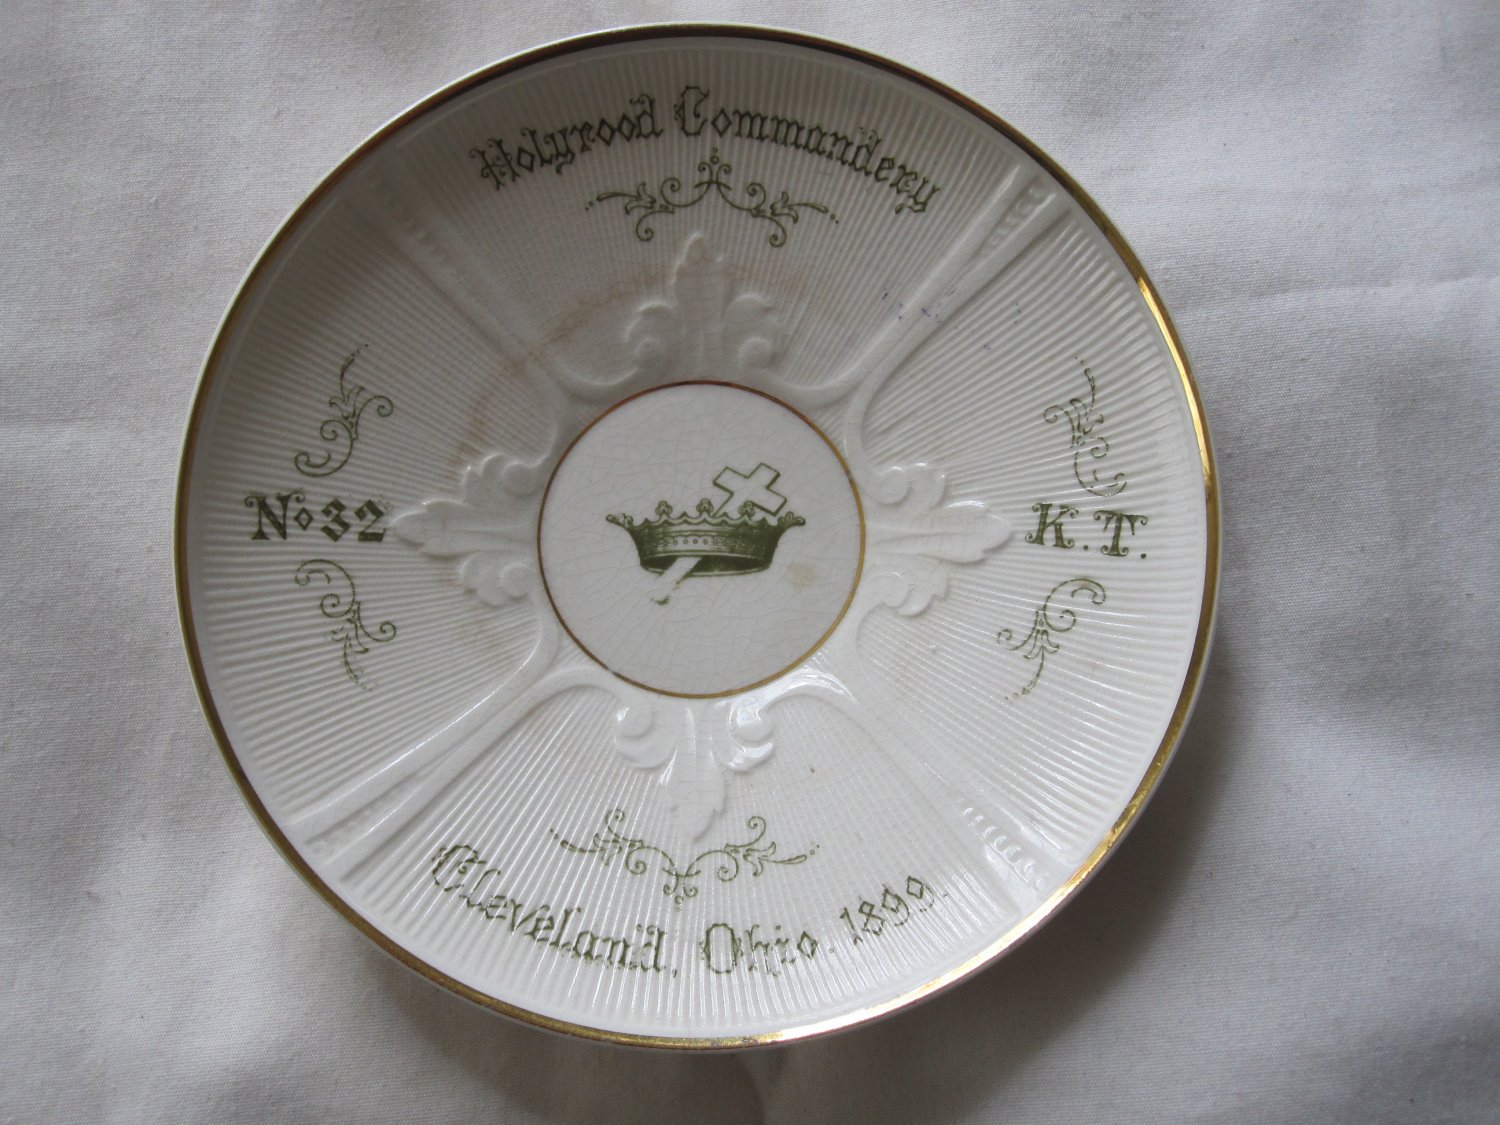 1899 Holyrod Commandery #32 K.T. , Cleveland Ohio 5" Knowles & Taylor Tea Saucer